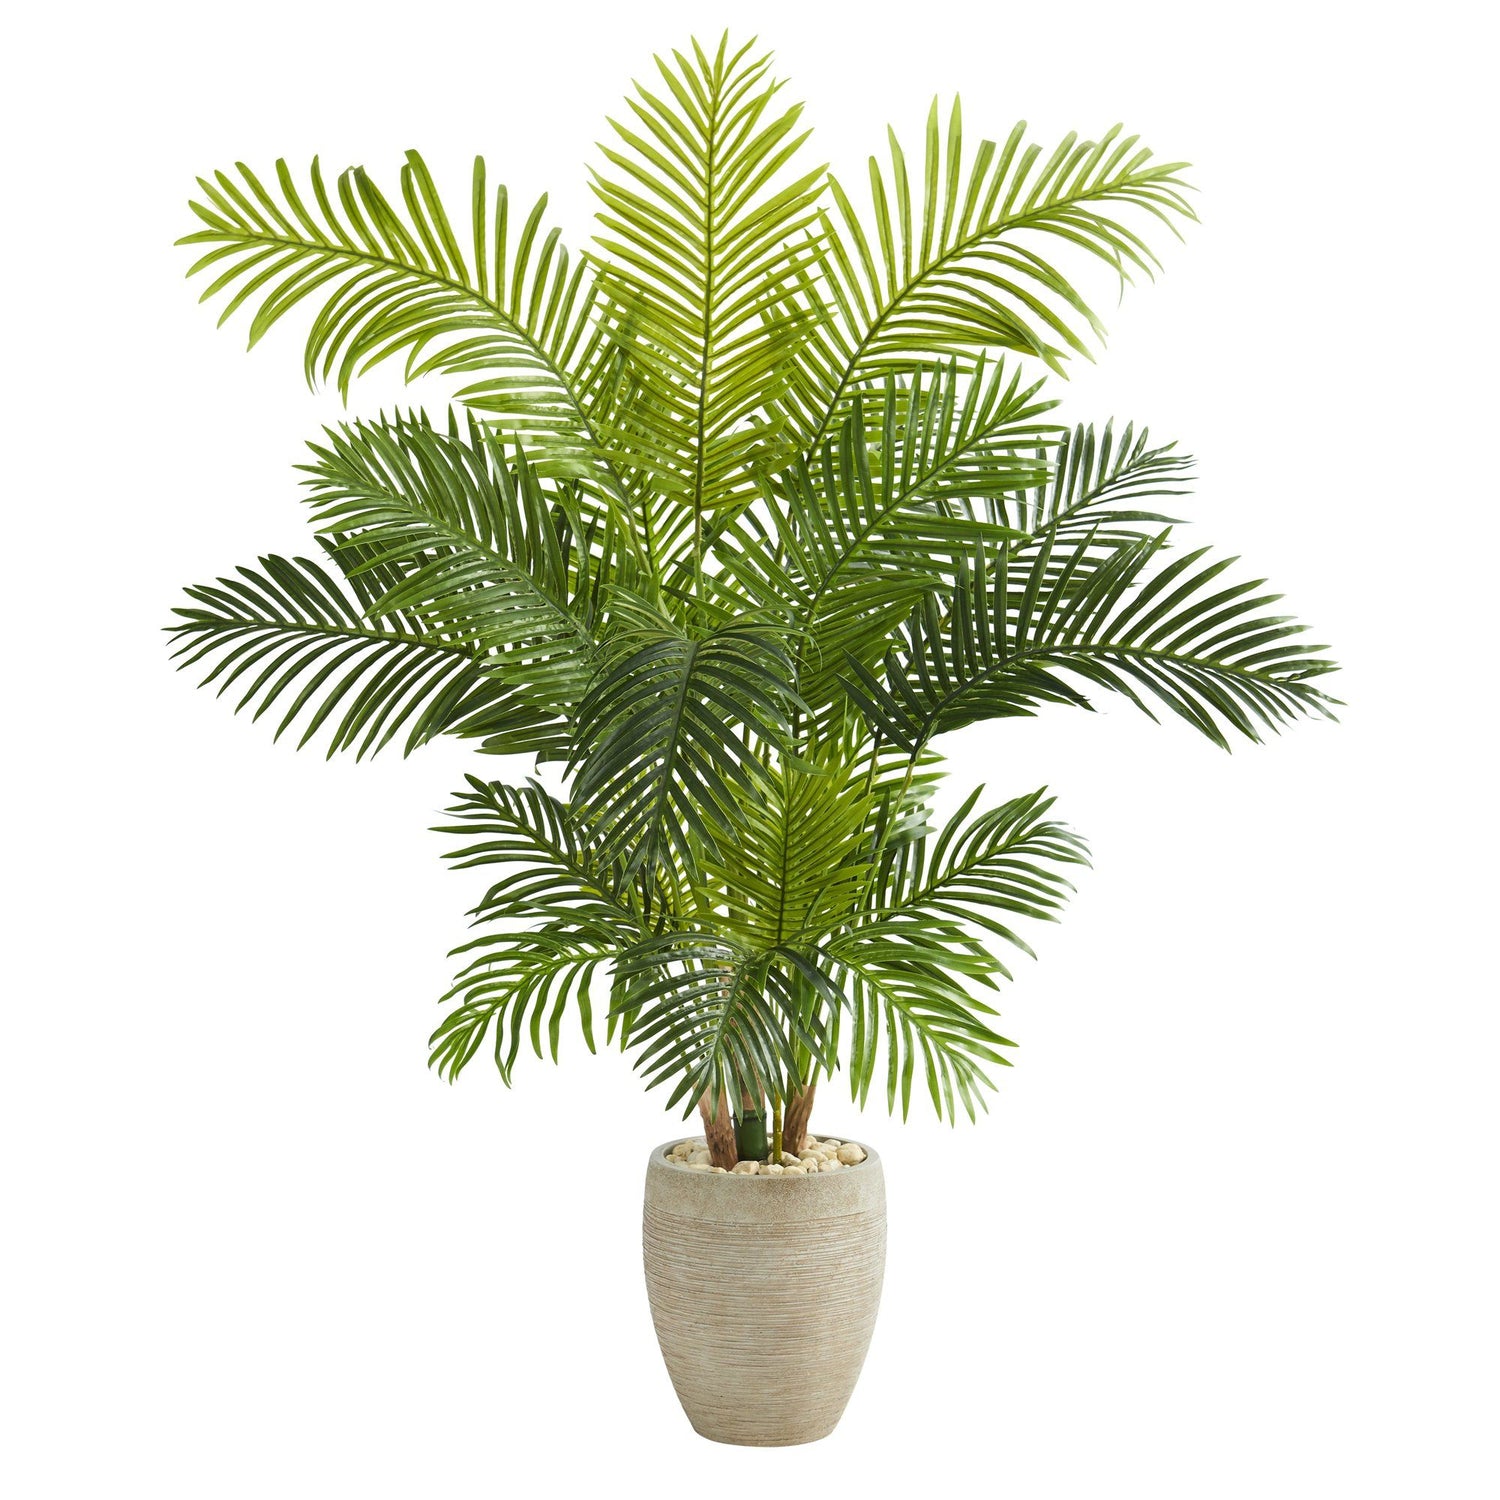 62” Hawaii Palm Artificial Tree in Sand Colored Planter